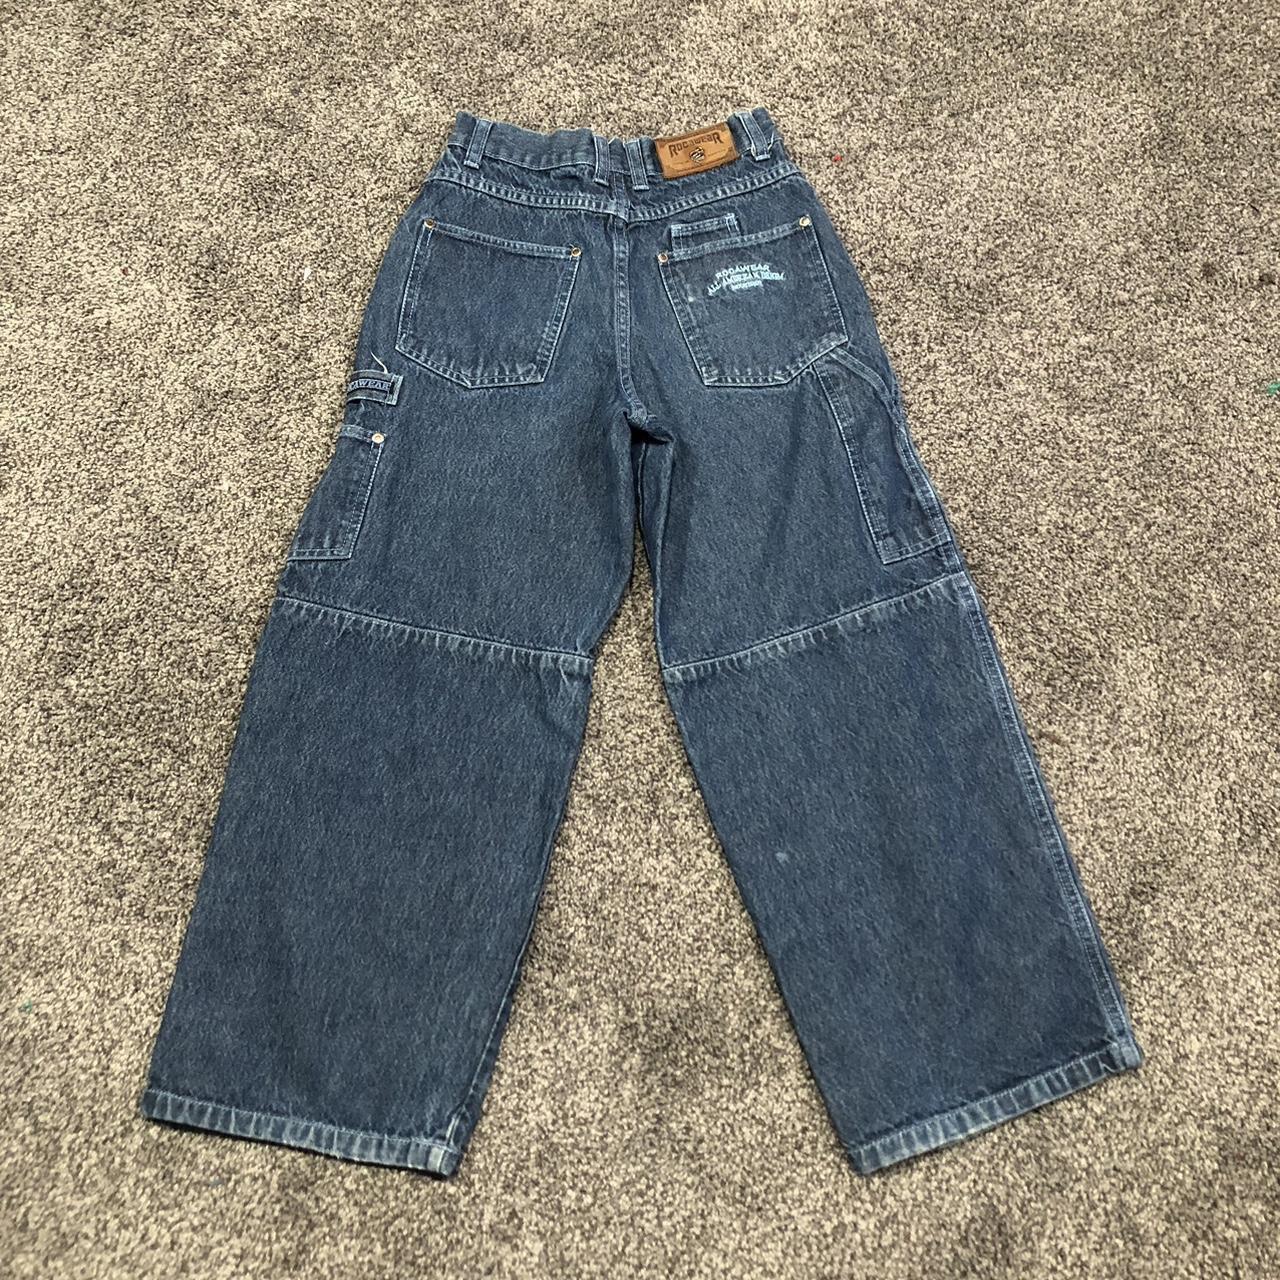 Kids rocawear jeans Super cool and in good condition - Depop